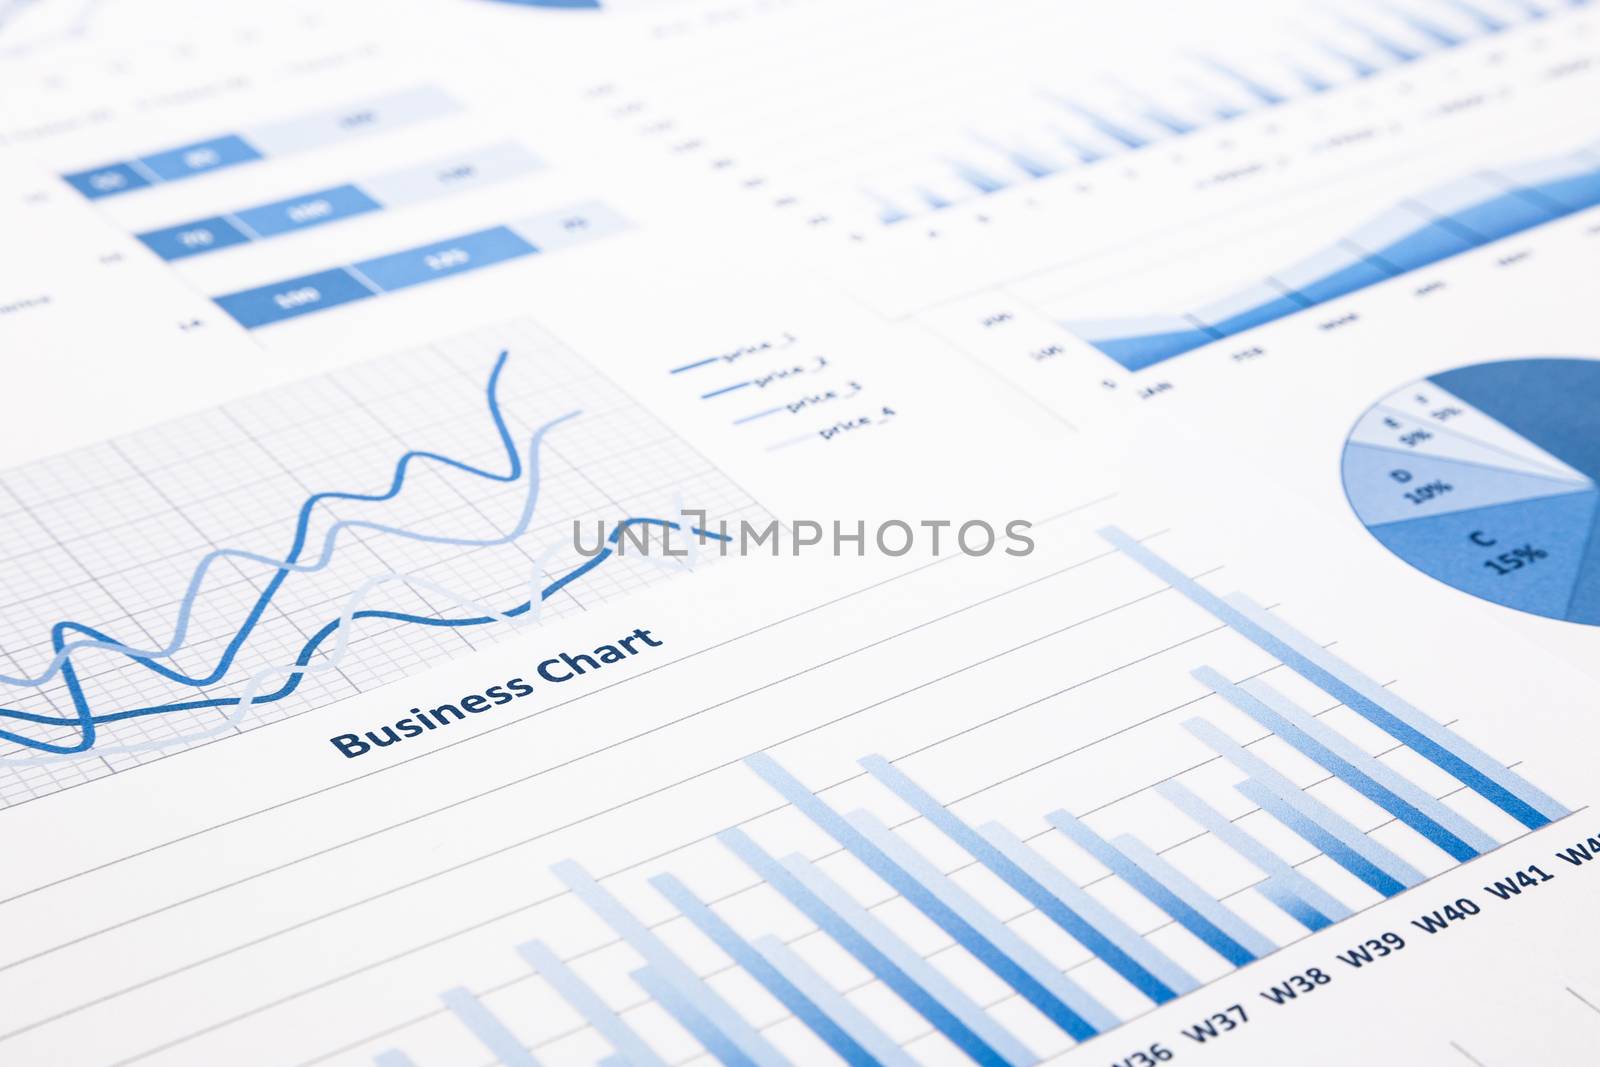 closeup blue business charts, graphs, statistic and reports for education and business concepts